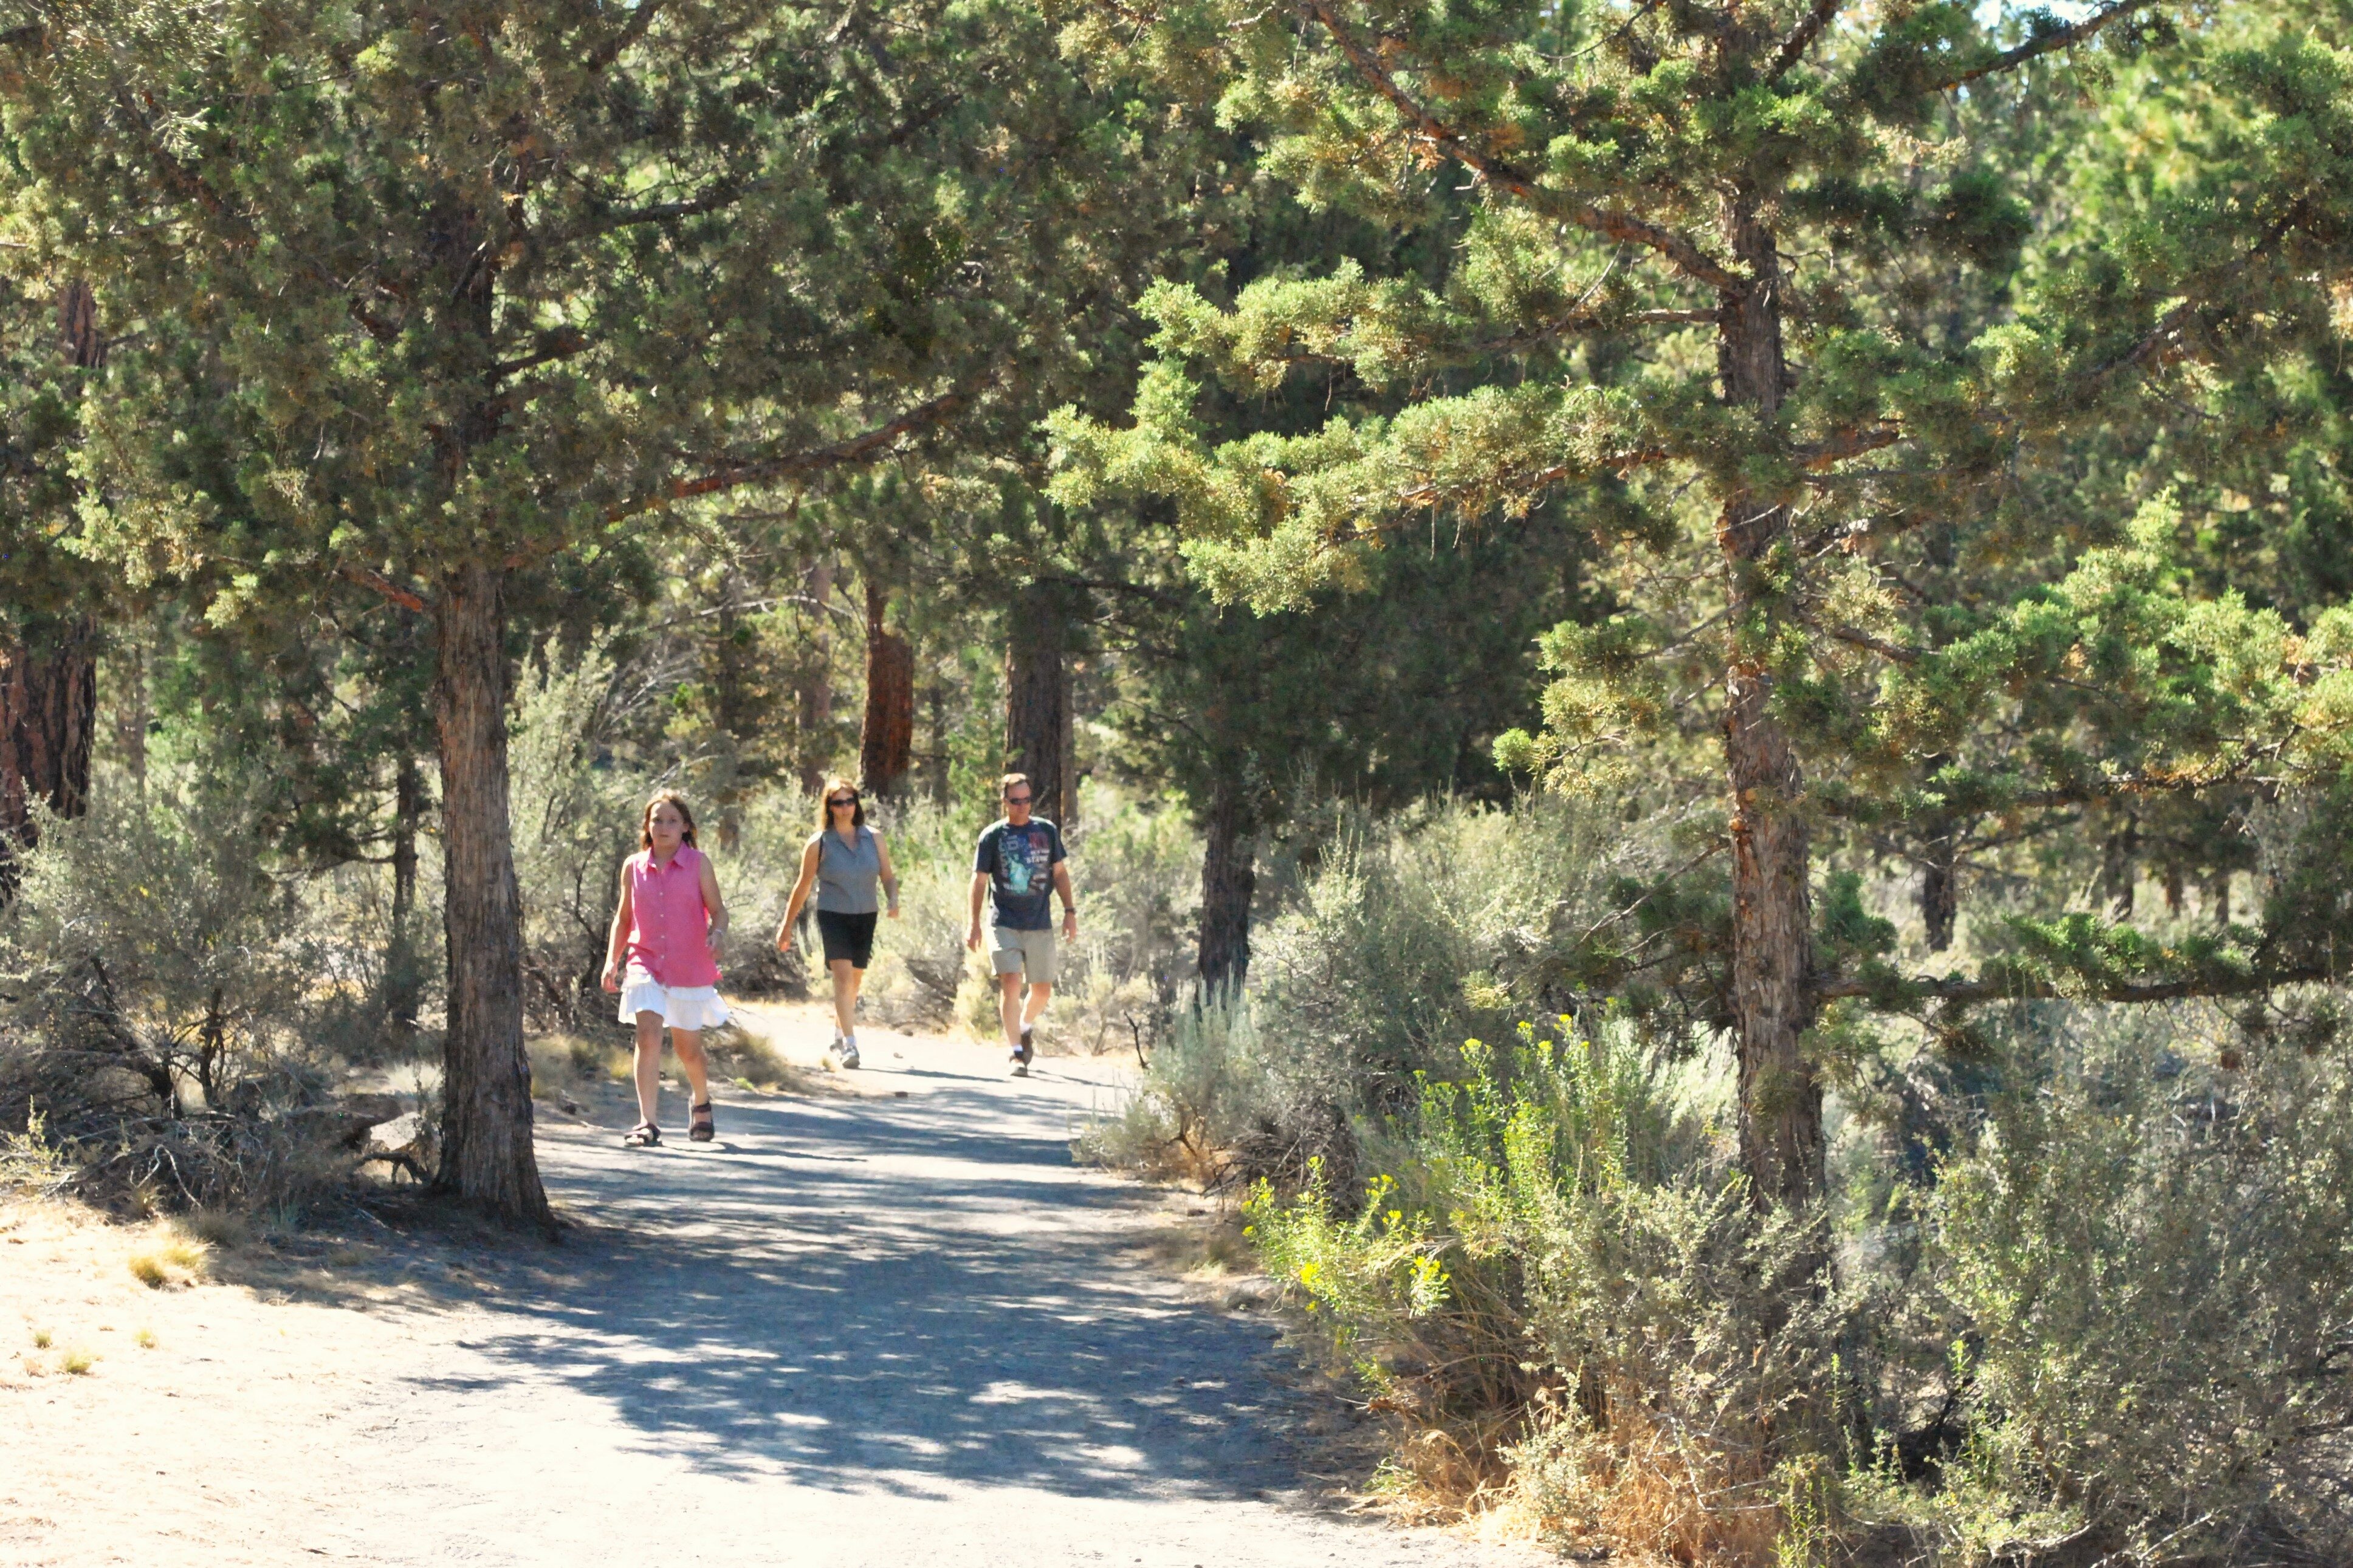 People walking on the aggregate trail in Sawyer Park